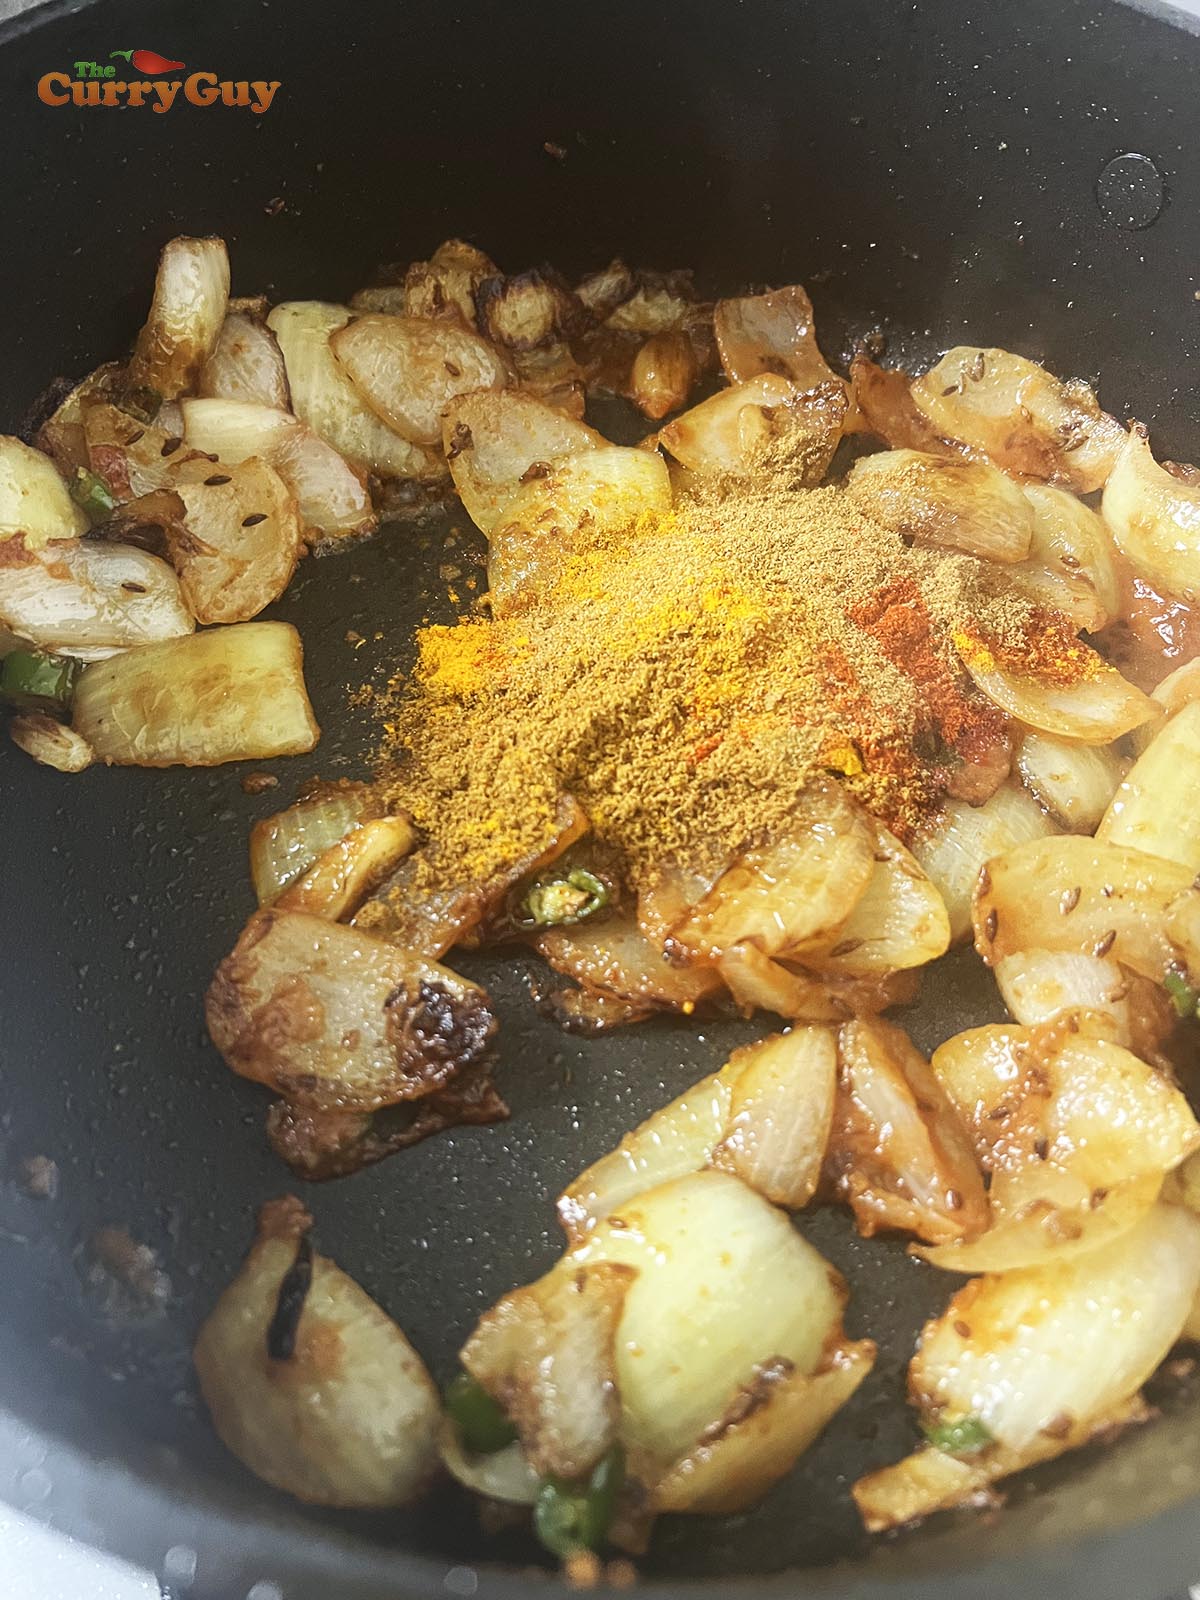 Adding ground spices to the curry